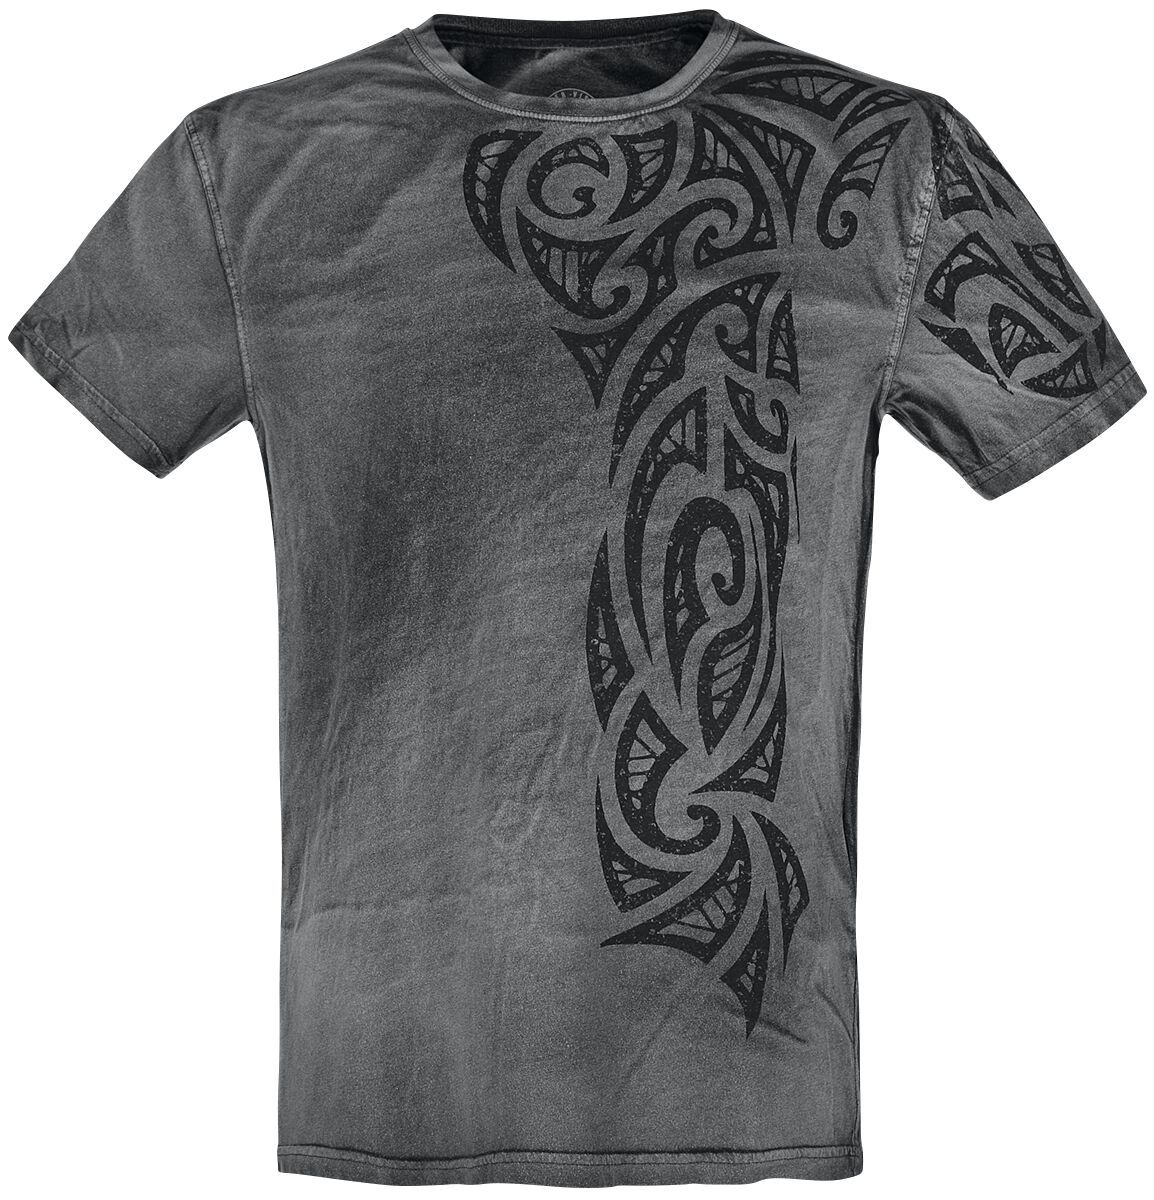 Image of T-Shirt di Outer Vision - Gothic Tattoo - S a 4XL - Uomo - grigio